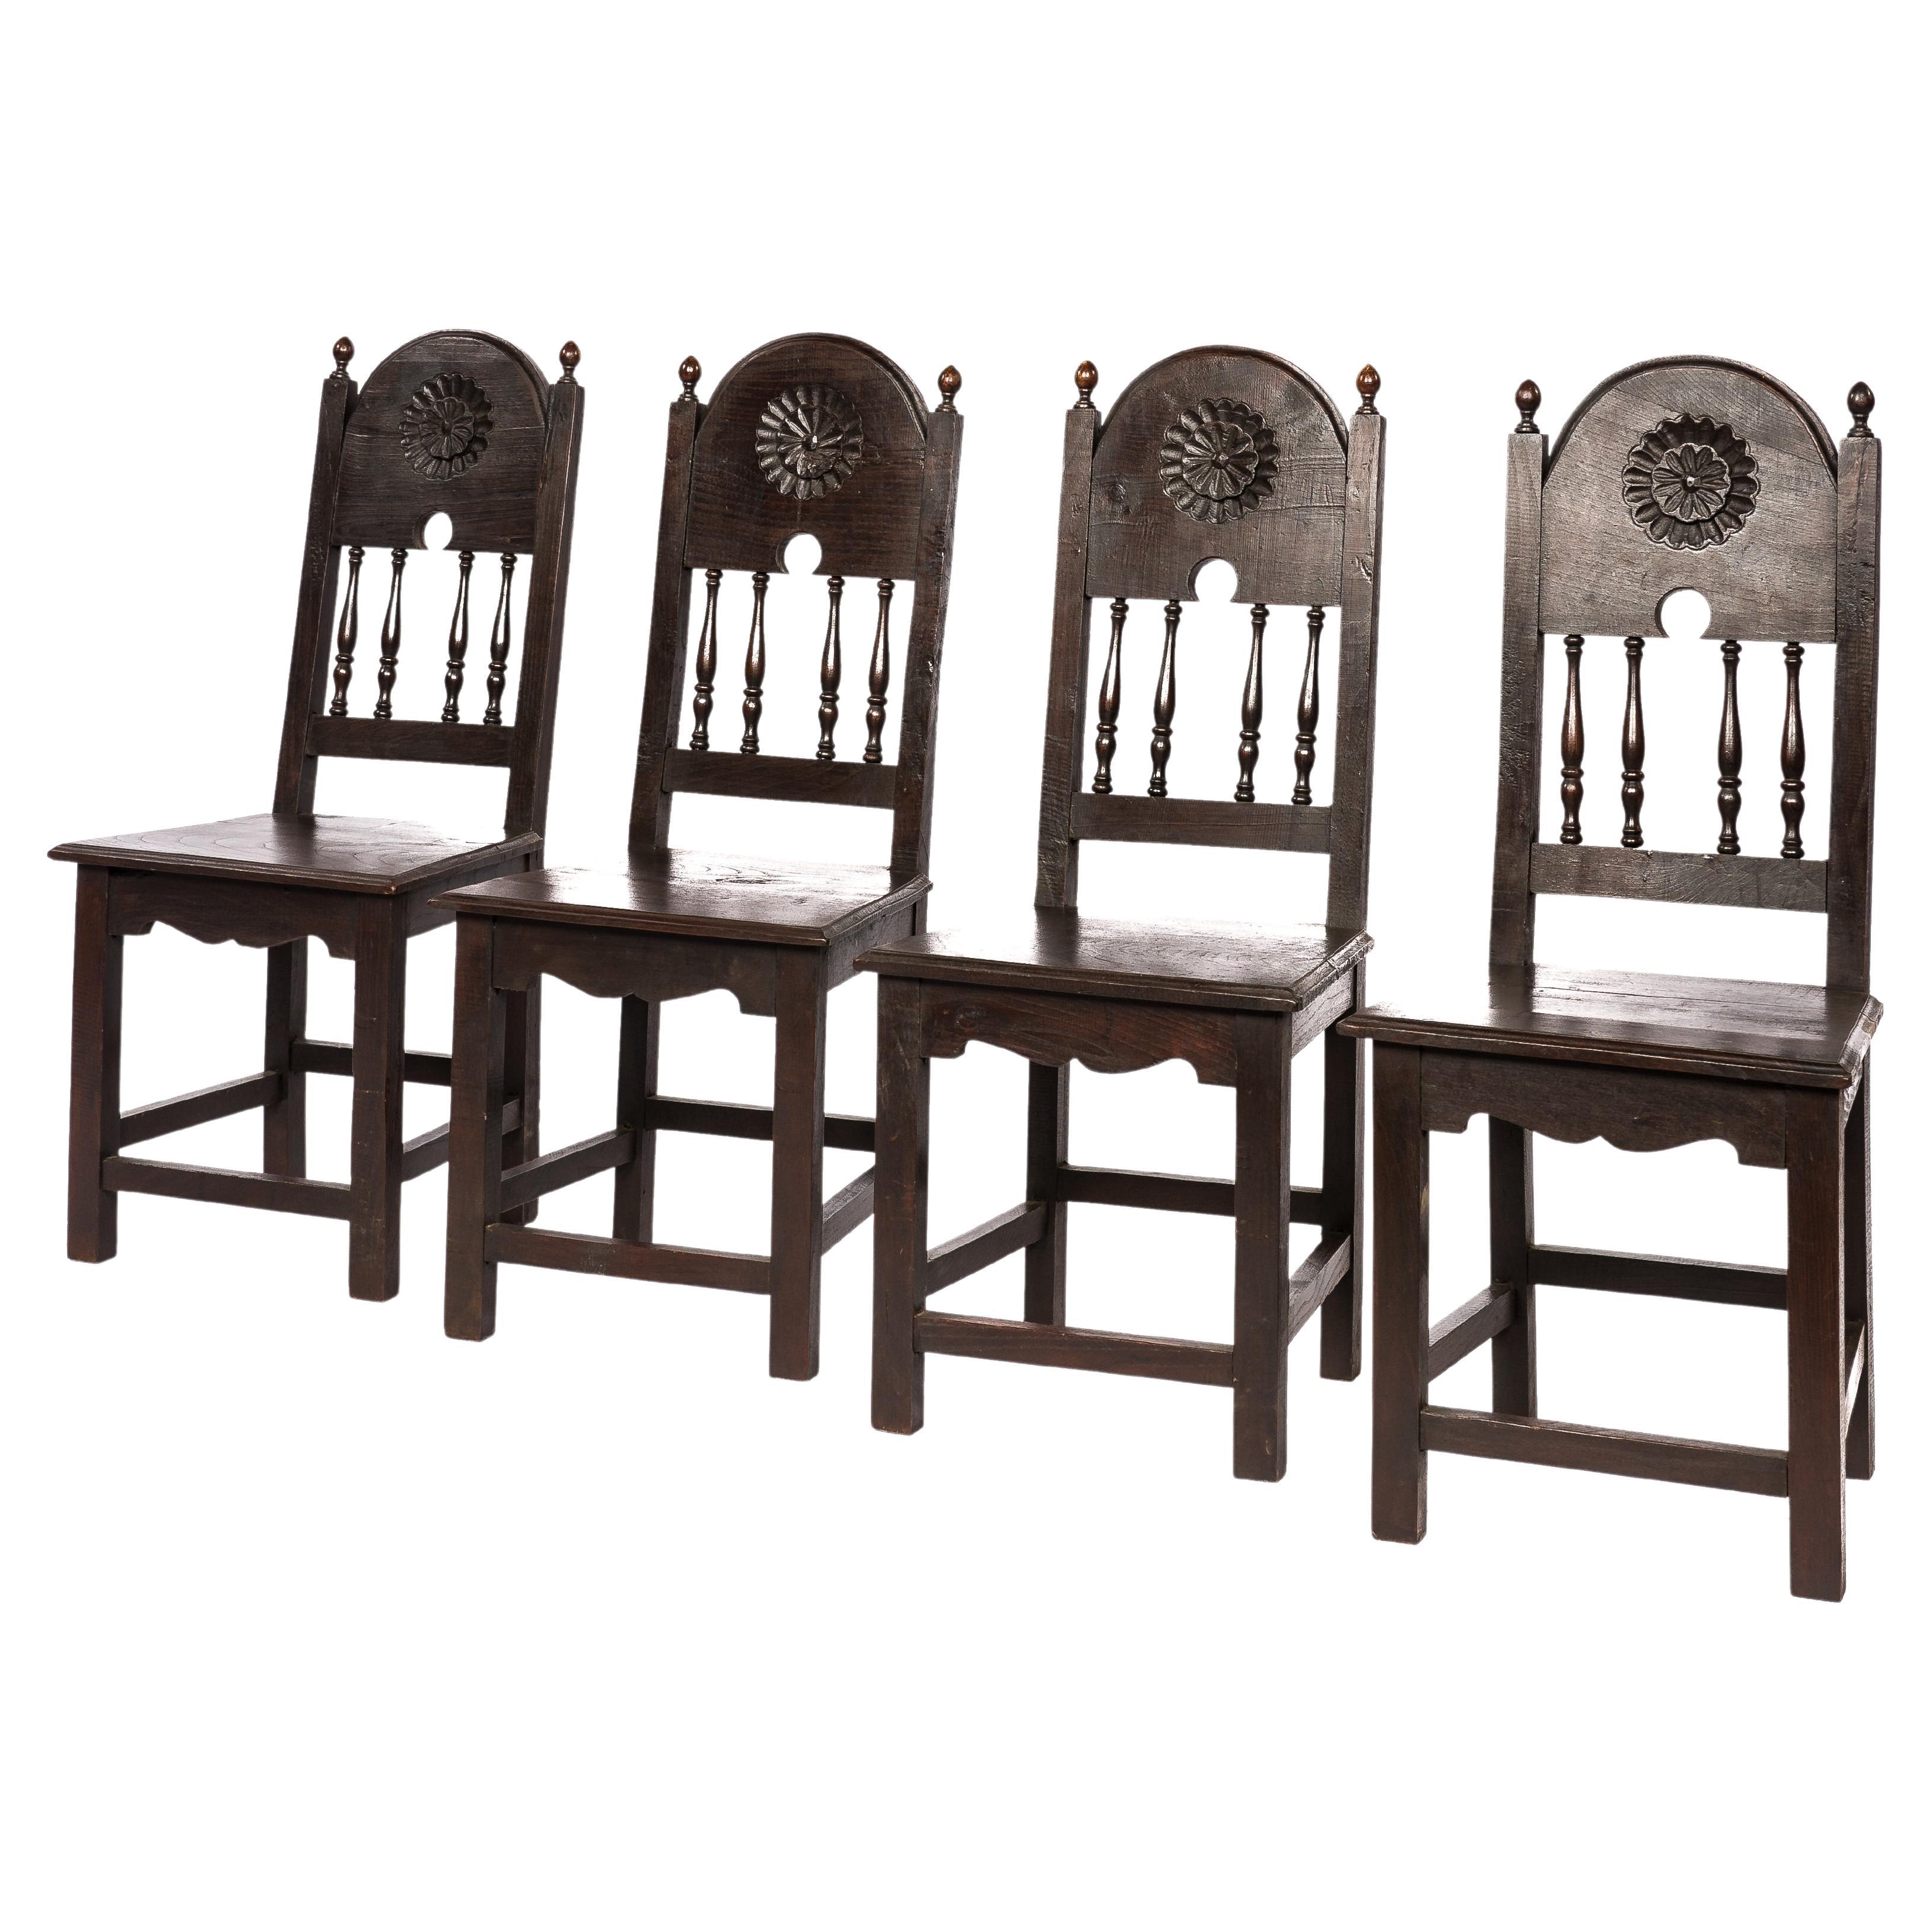 Antique early 20th-century set of four solid chestnut dark brown Spanish chairs For Sale